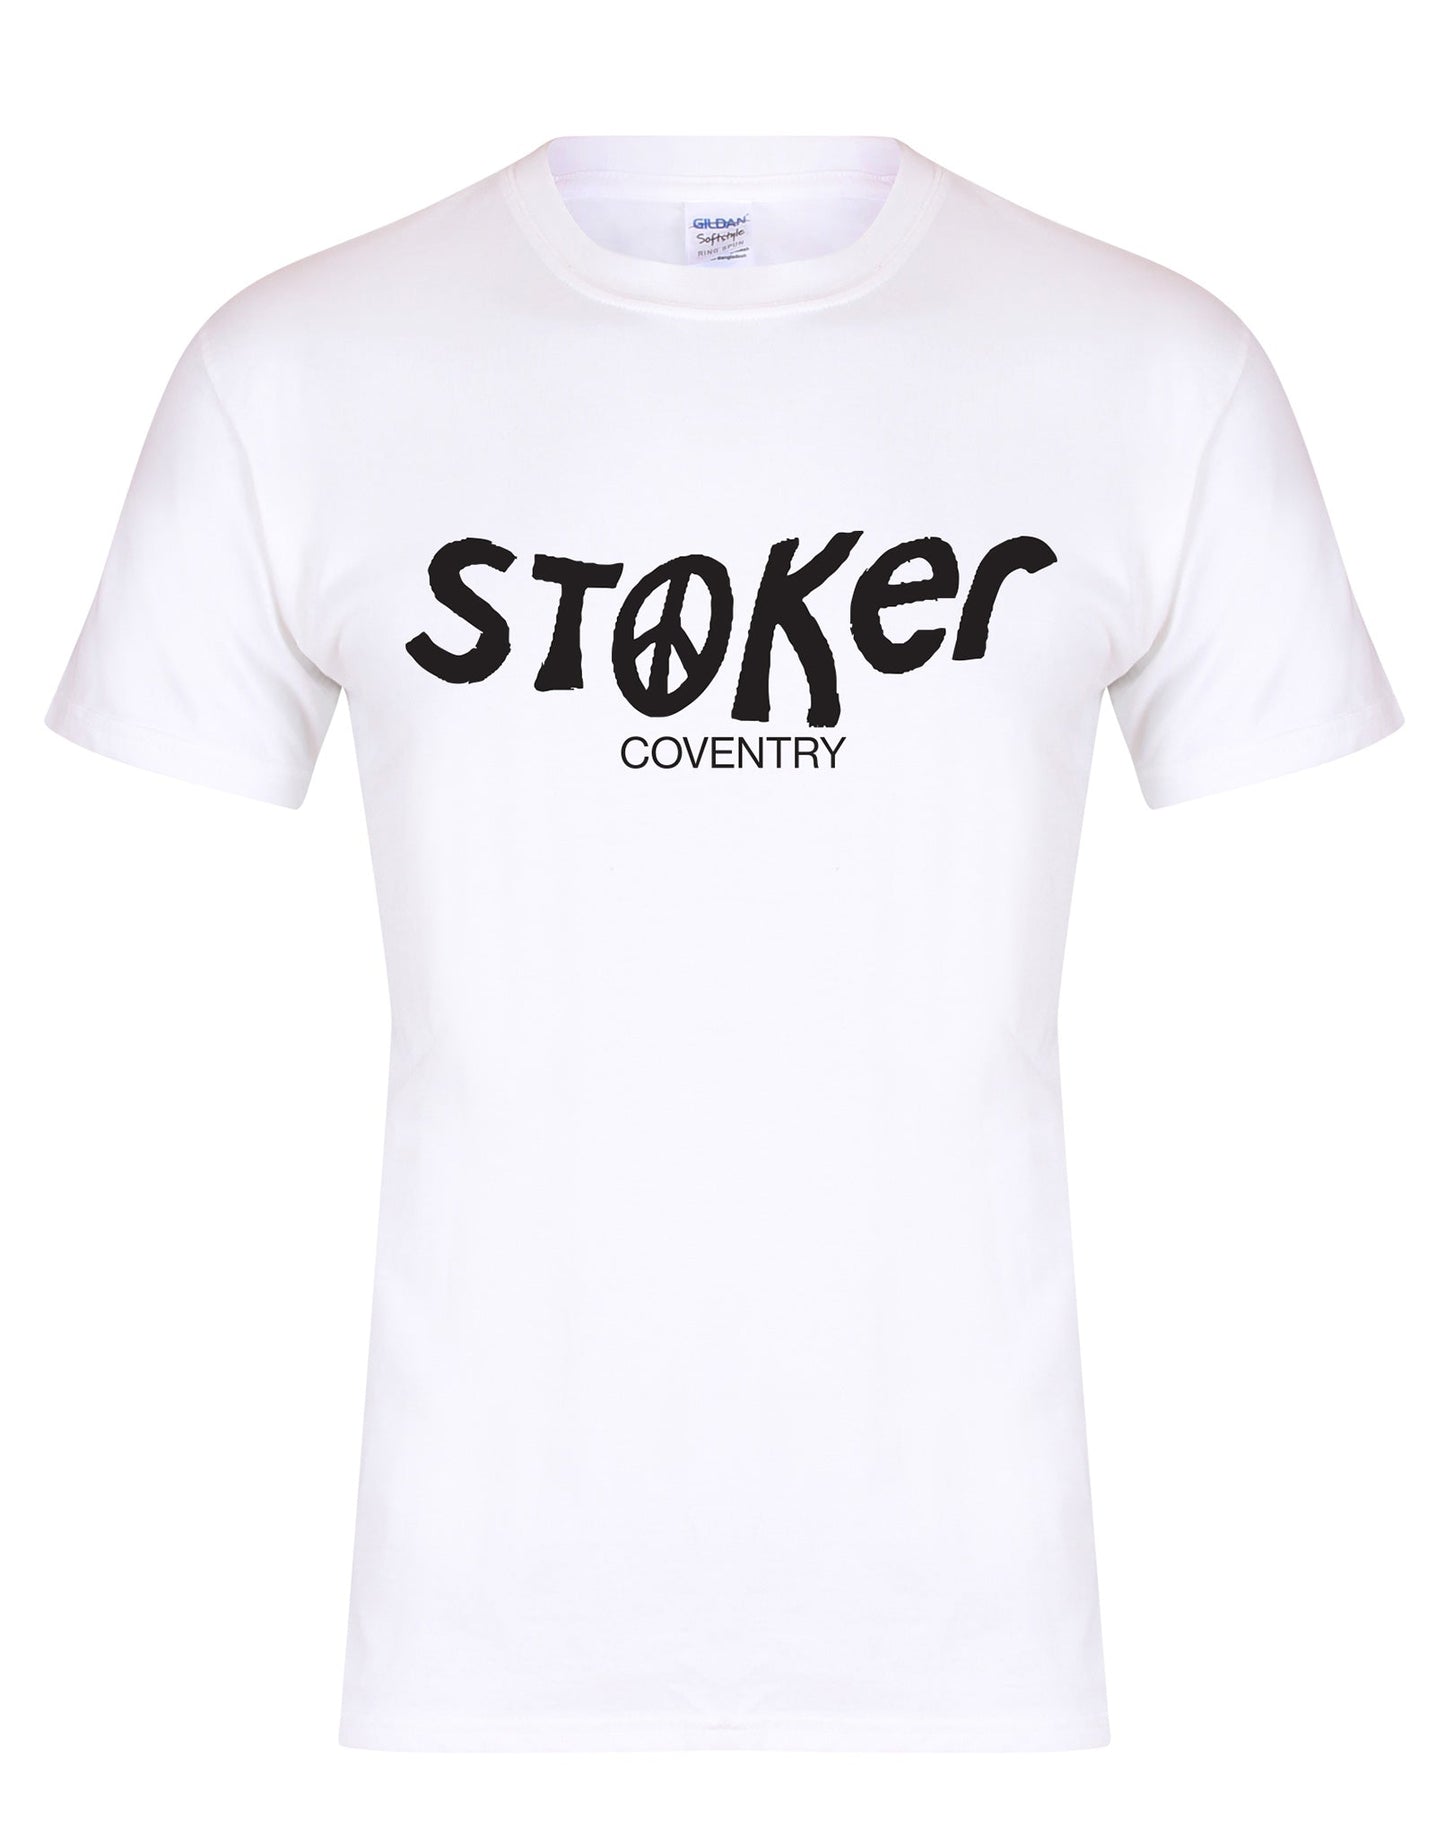 Stoker unisex fit T-shirt - various colours - Dirty Stop Outs